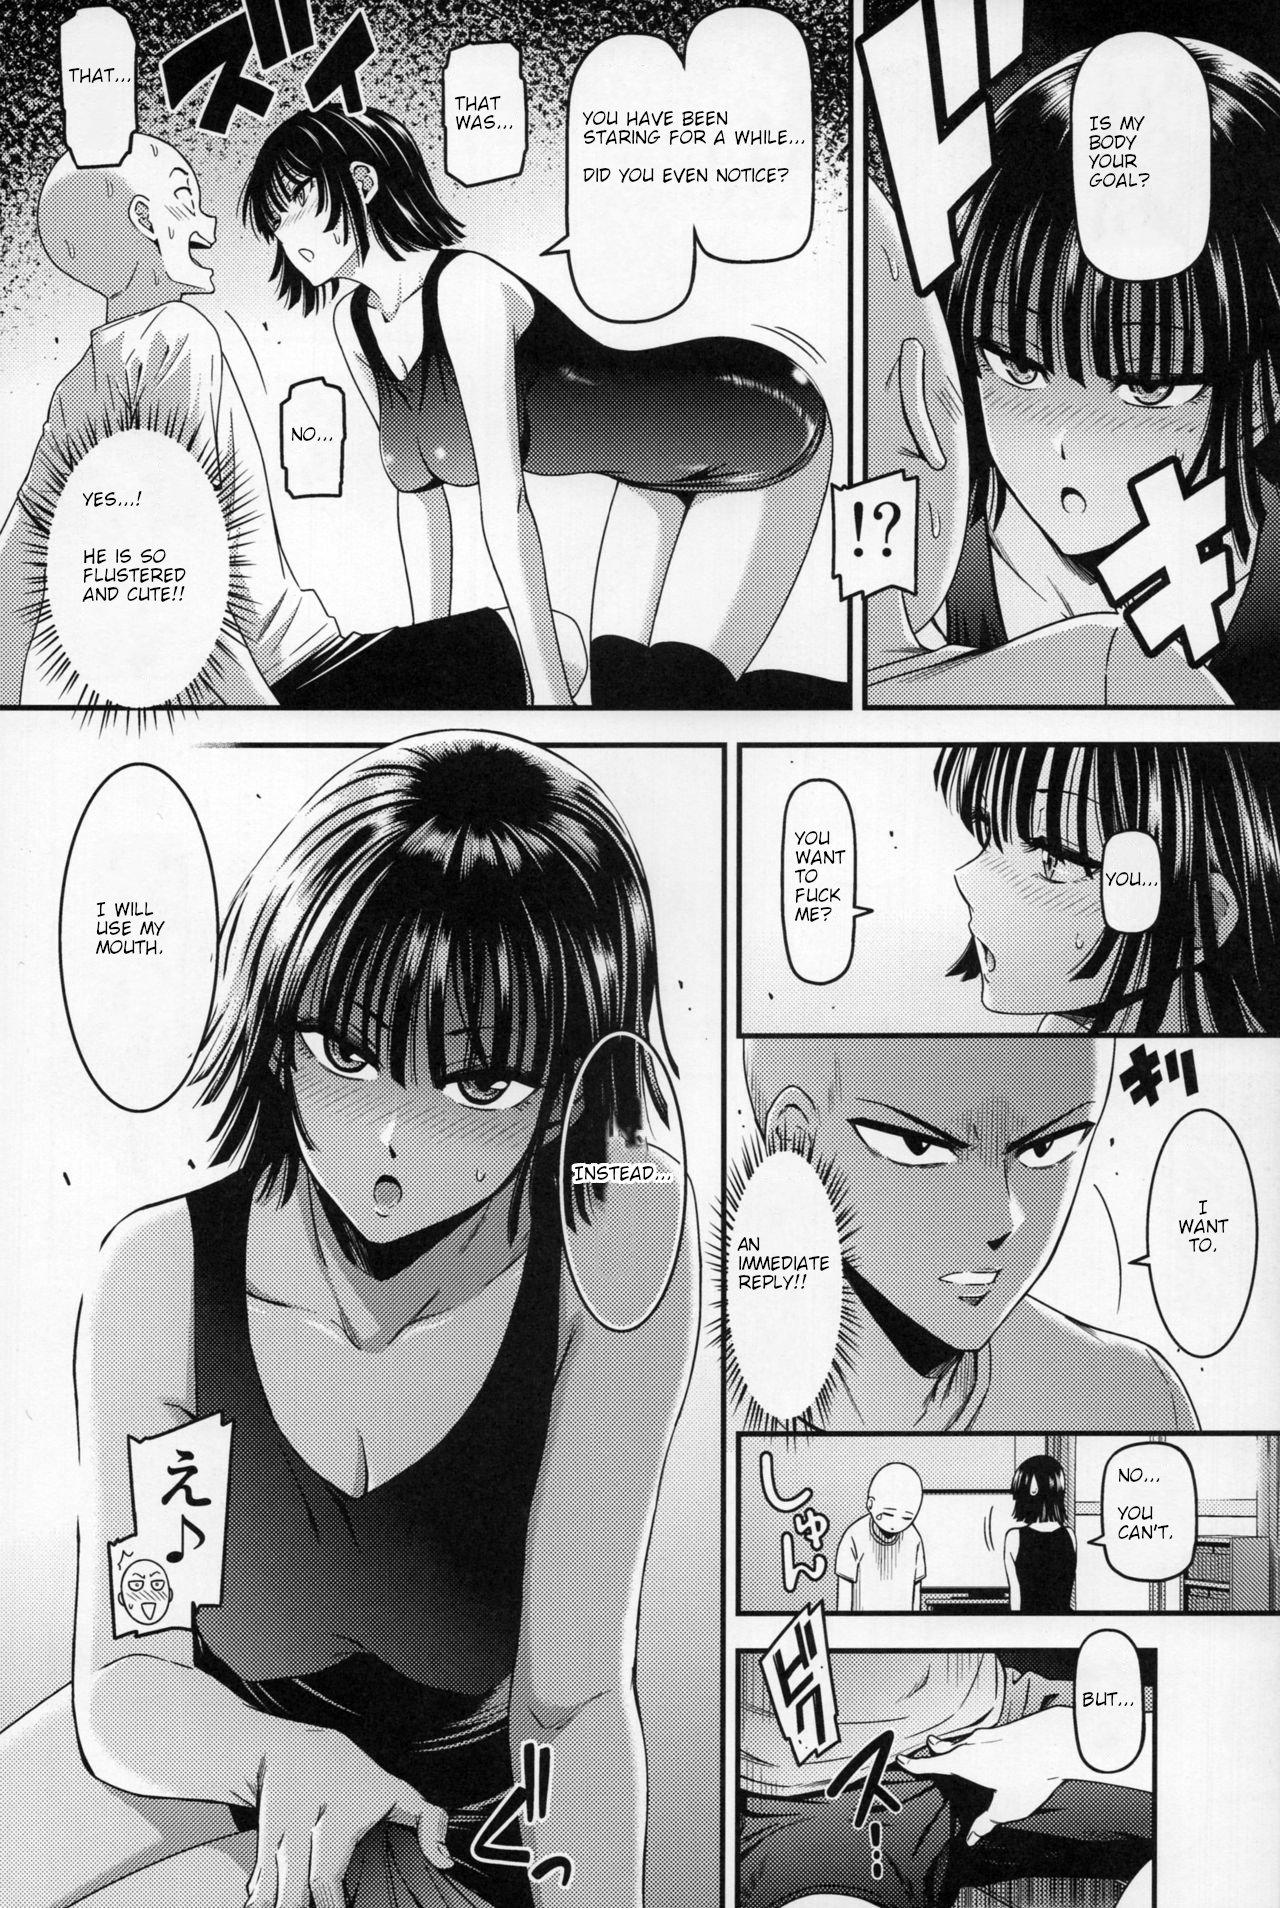 Outdoor Sex ONE-HURRICANE 6 - One punch man Horny - Page 9